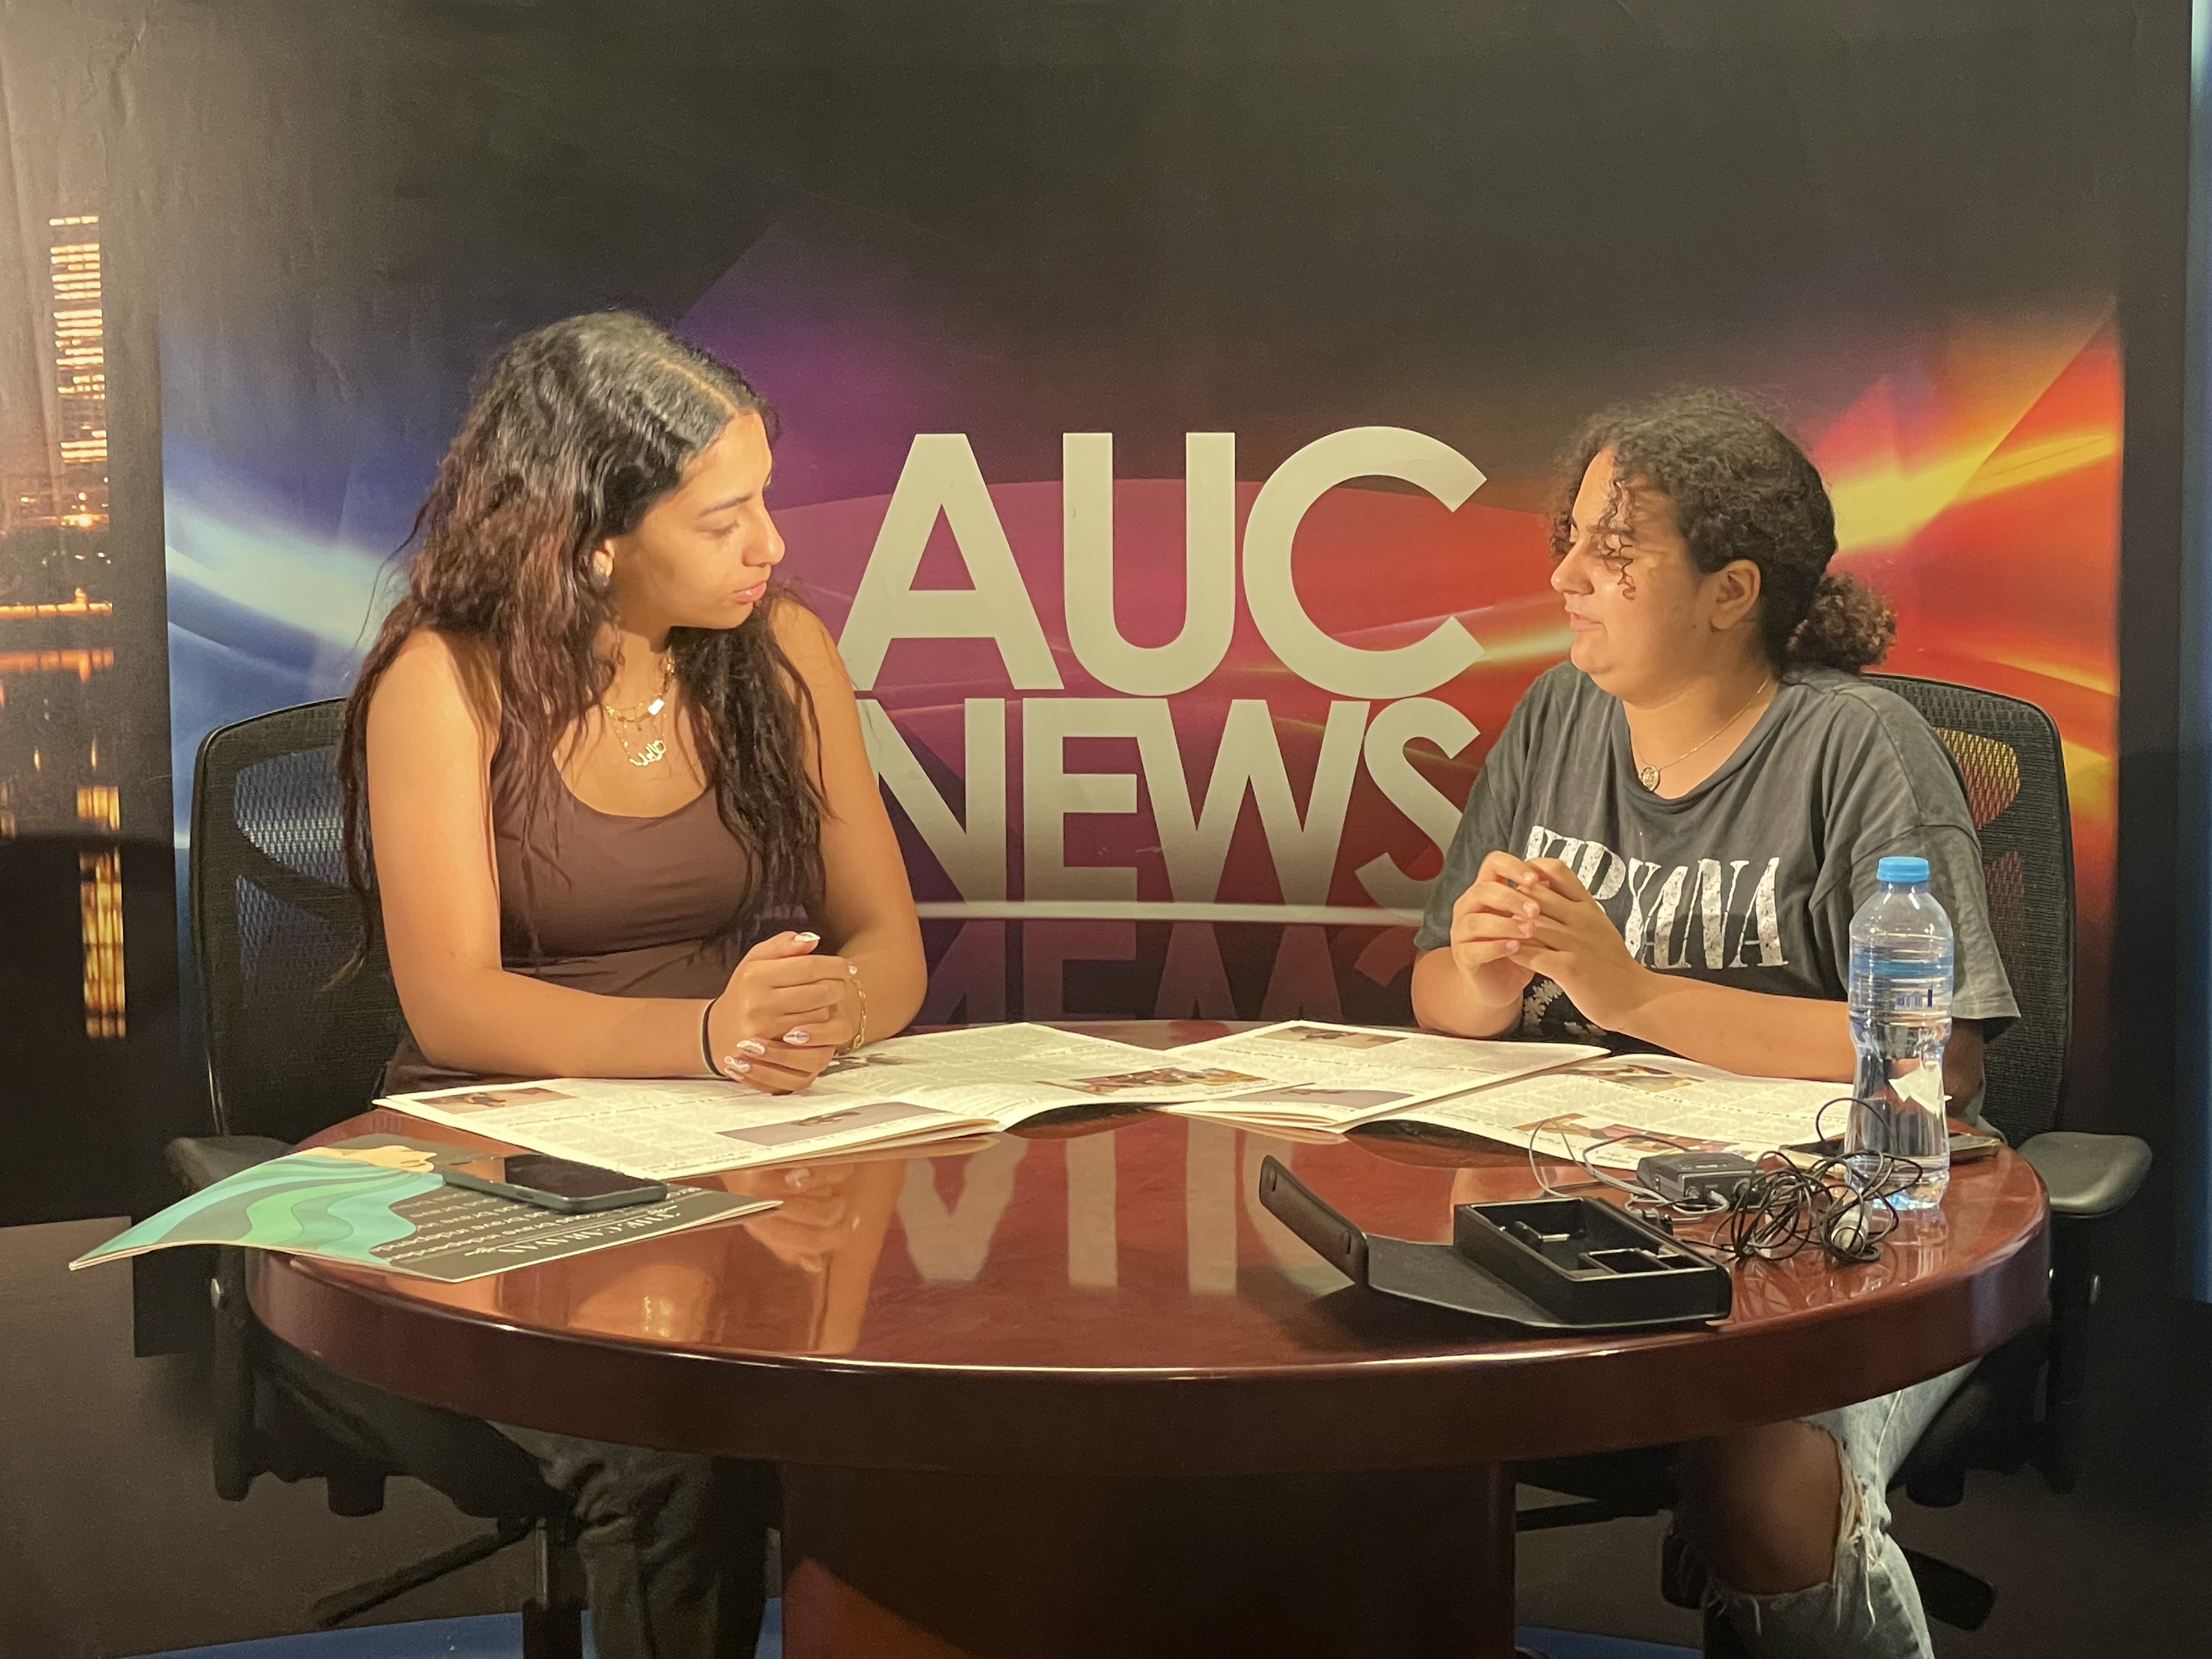 2 students sitting on a media interview table with AUC News banner behind them